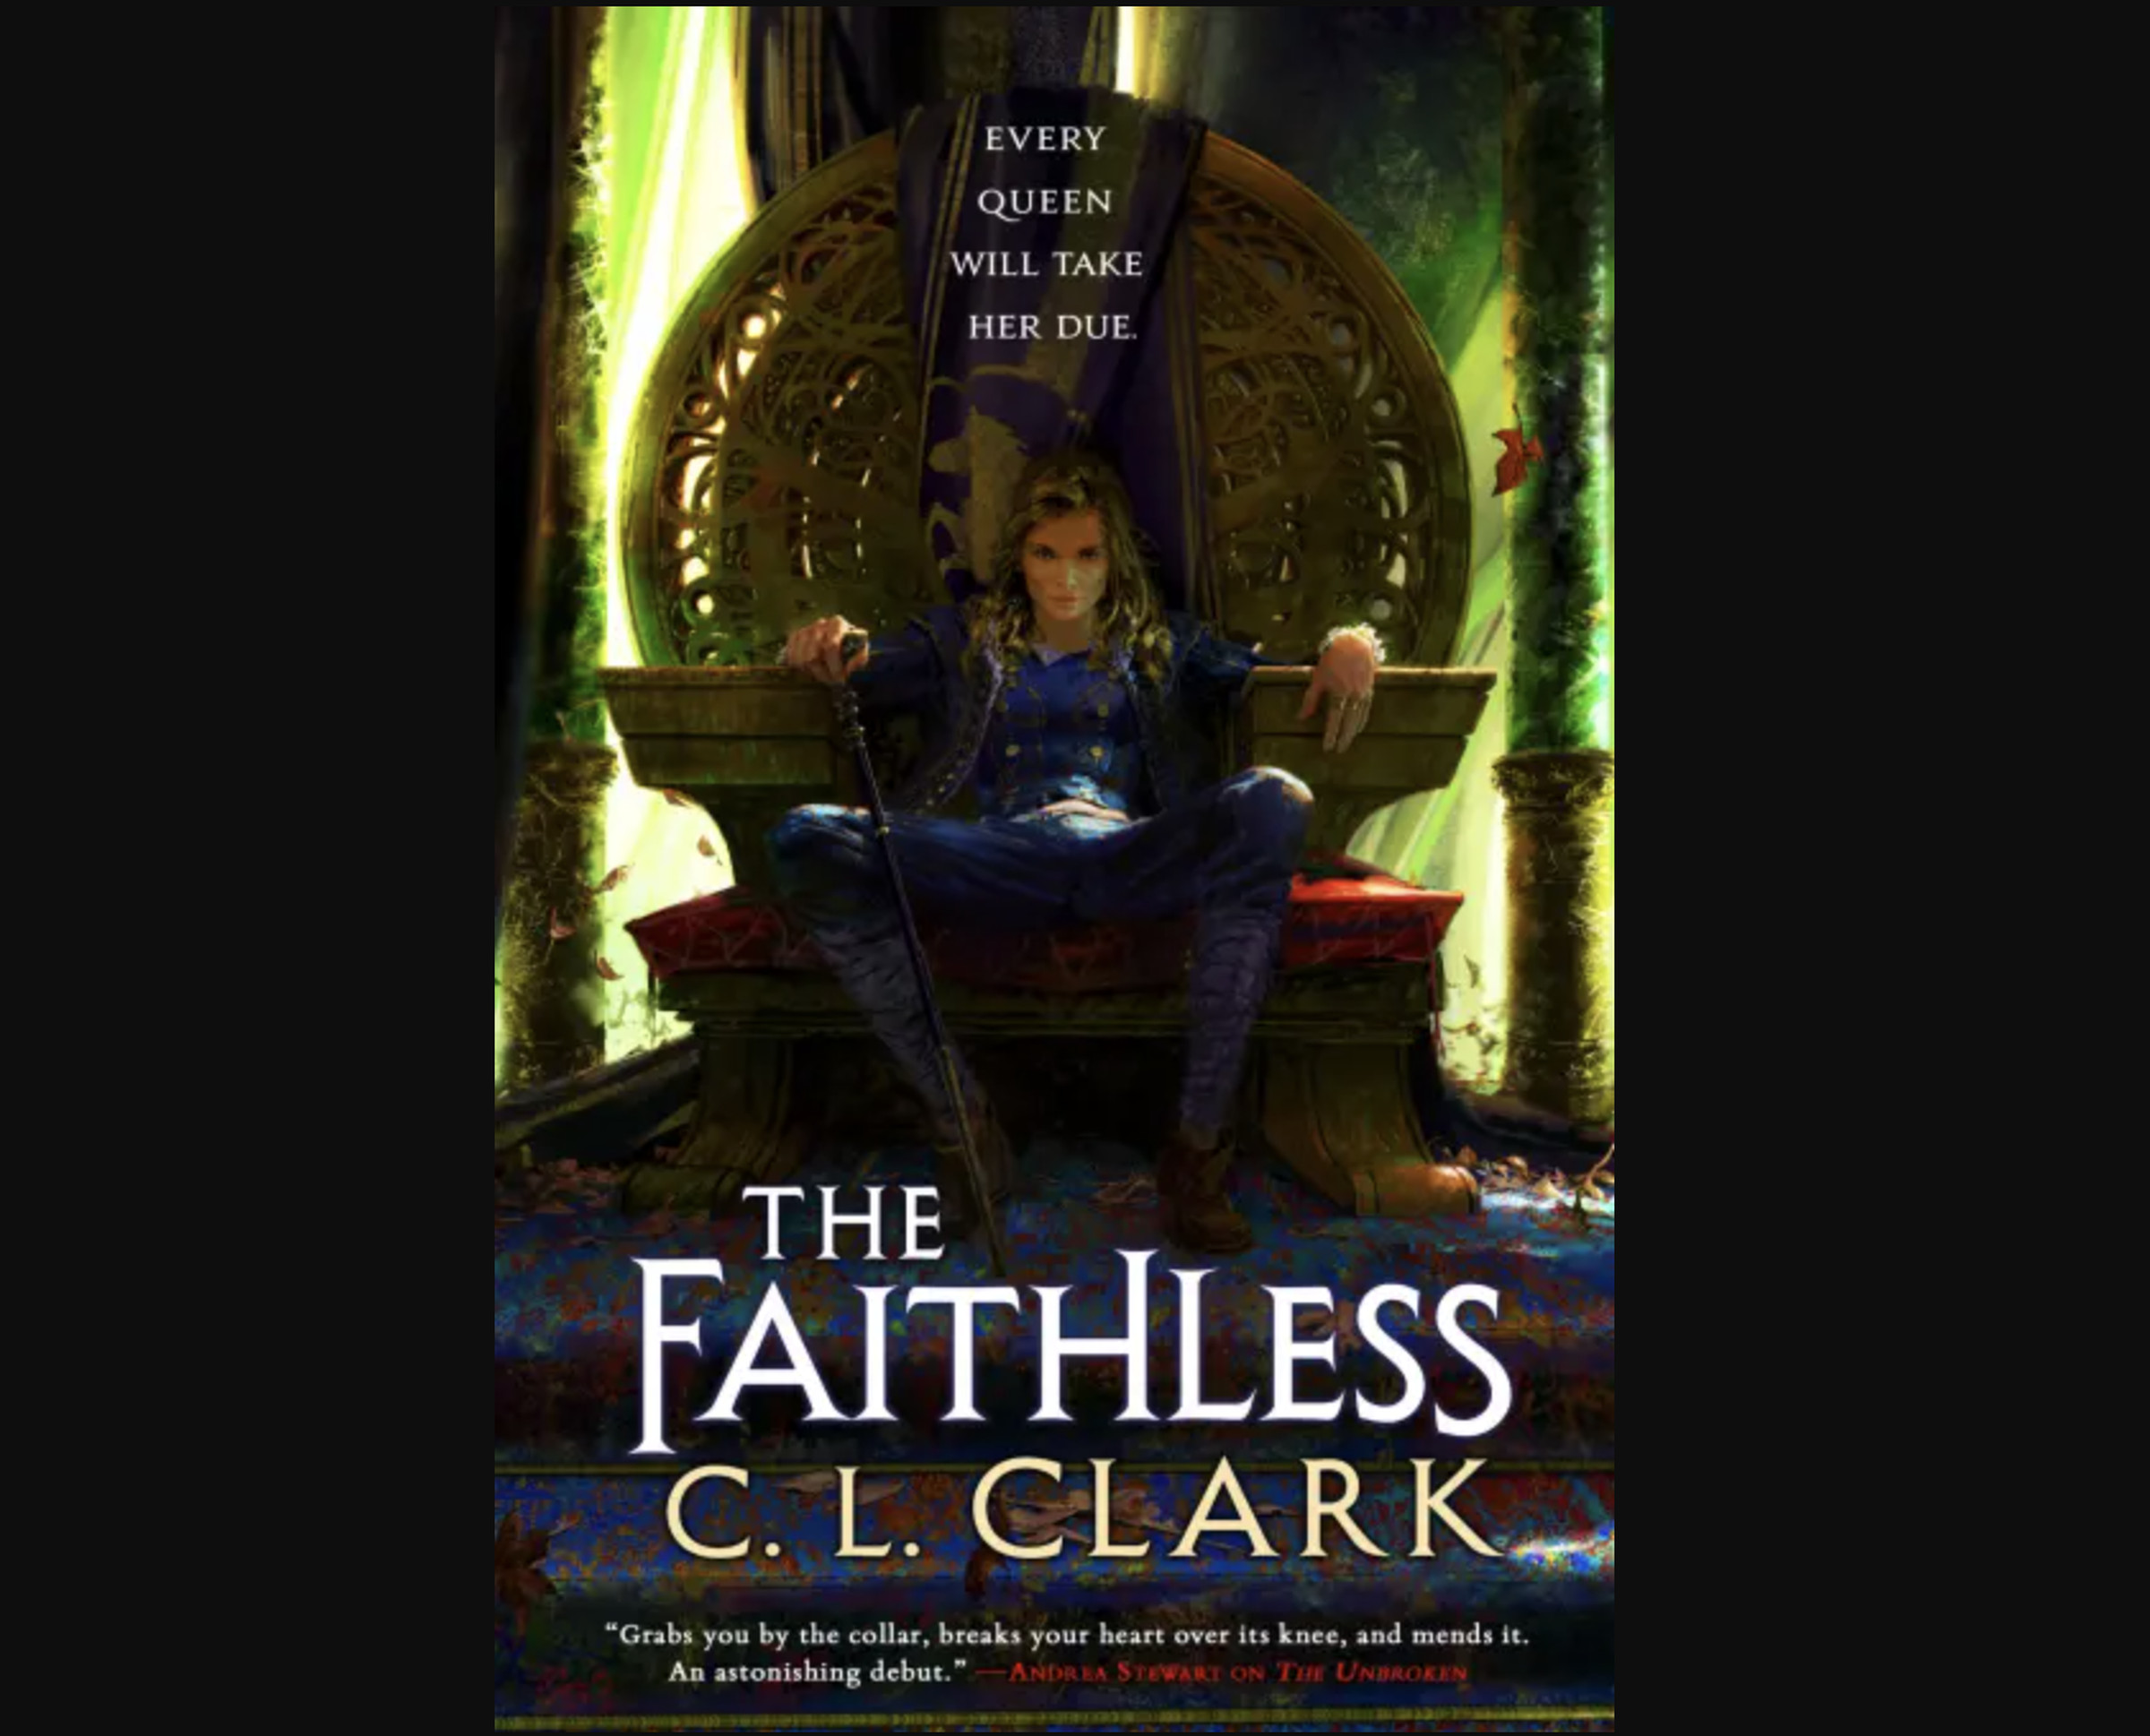 Book cover showing a woman sitting on a large cane chair.